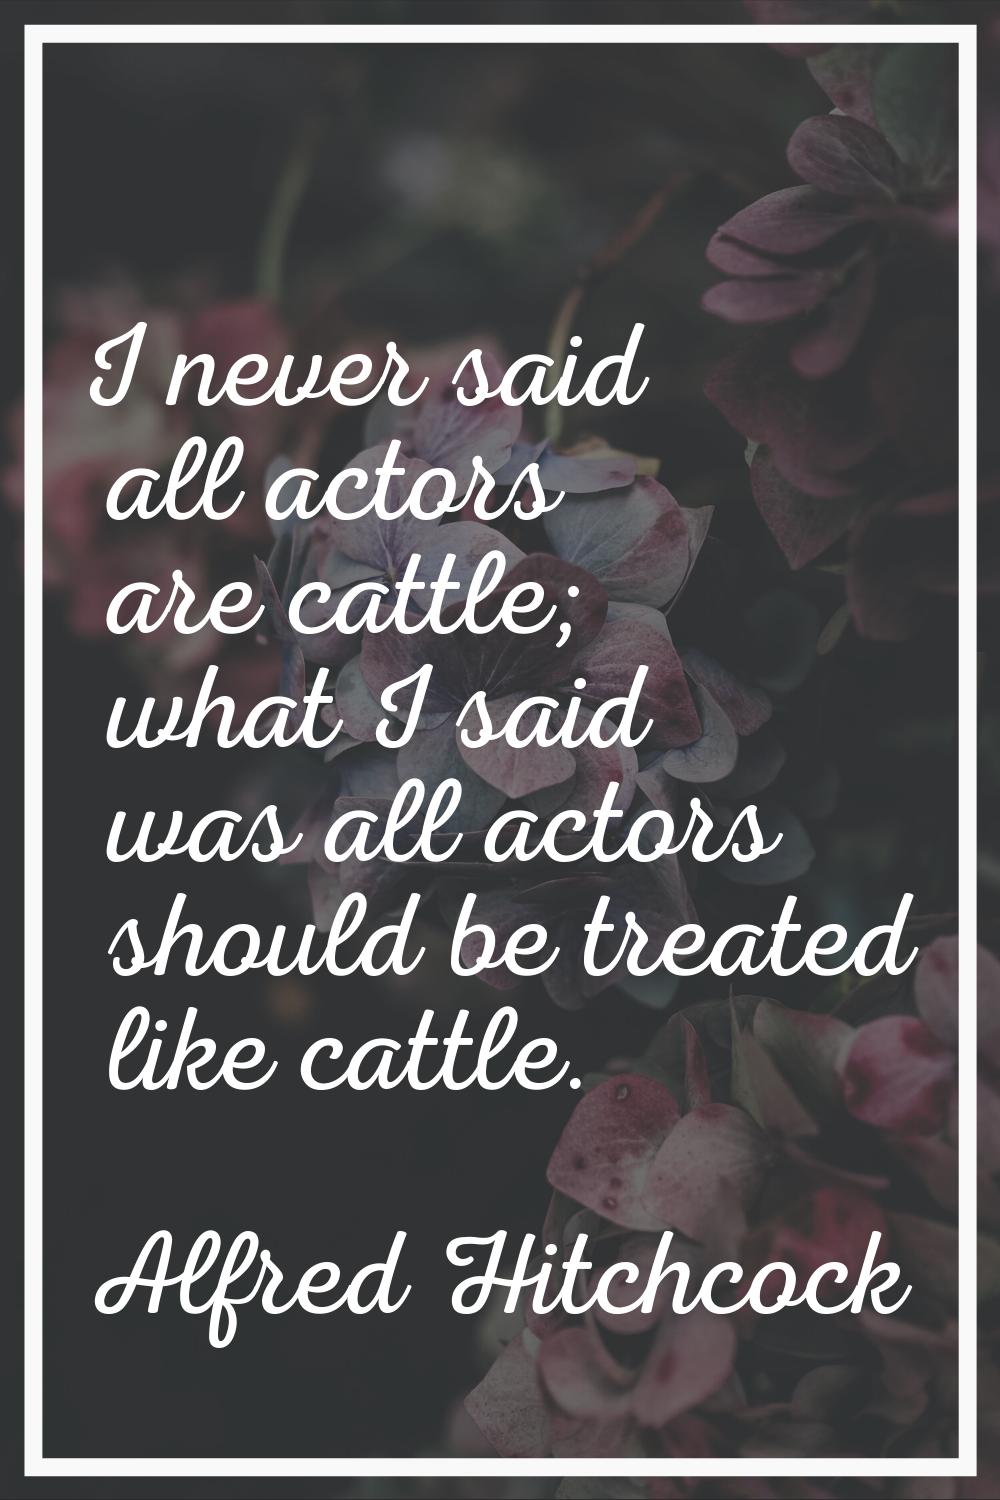 I never said all actors are cattle; what I said was all actors should be treated like cattle.